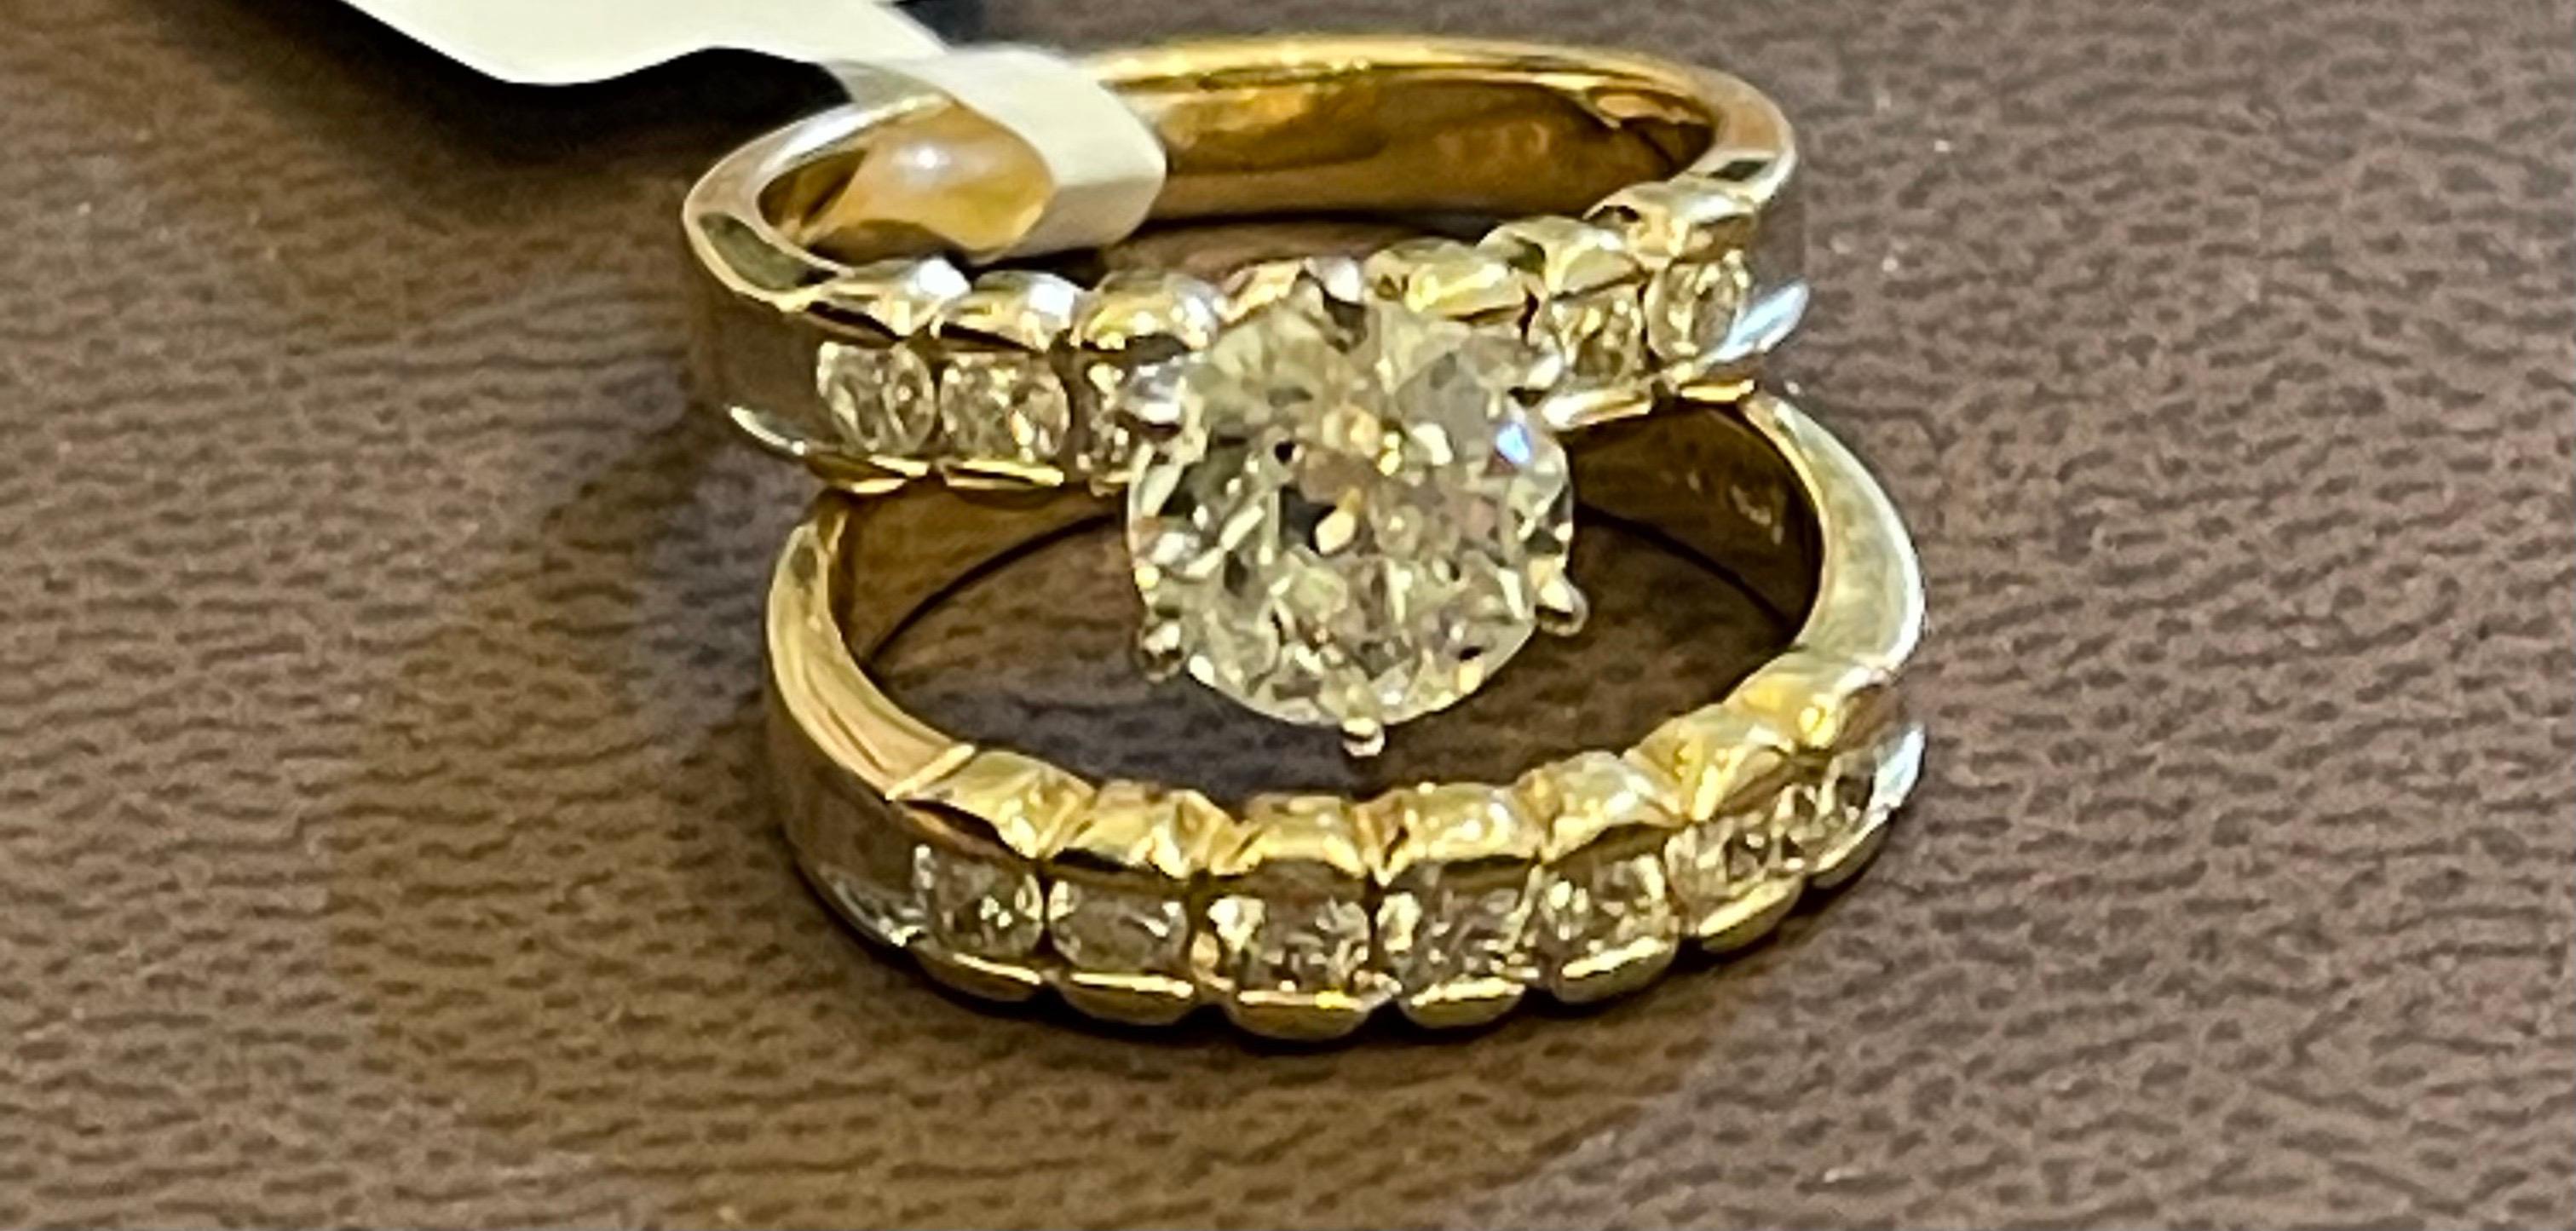 1.25 Carat Solitaire Round Center Diamond Engagement 14 Yellow Gold Ring + Band For Sale 7